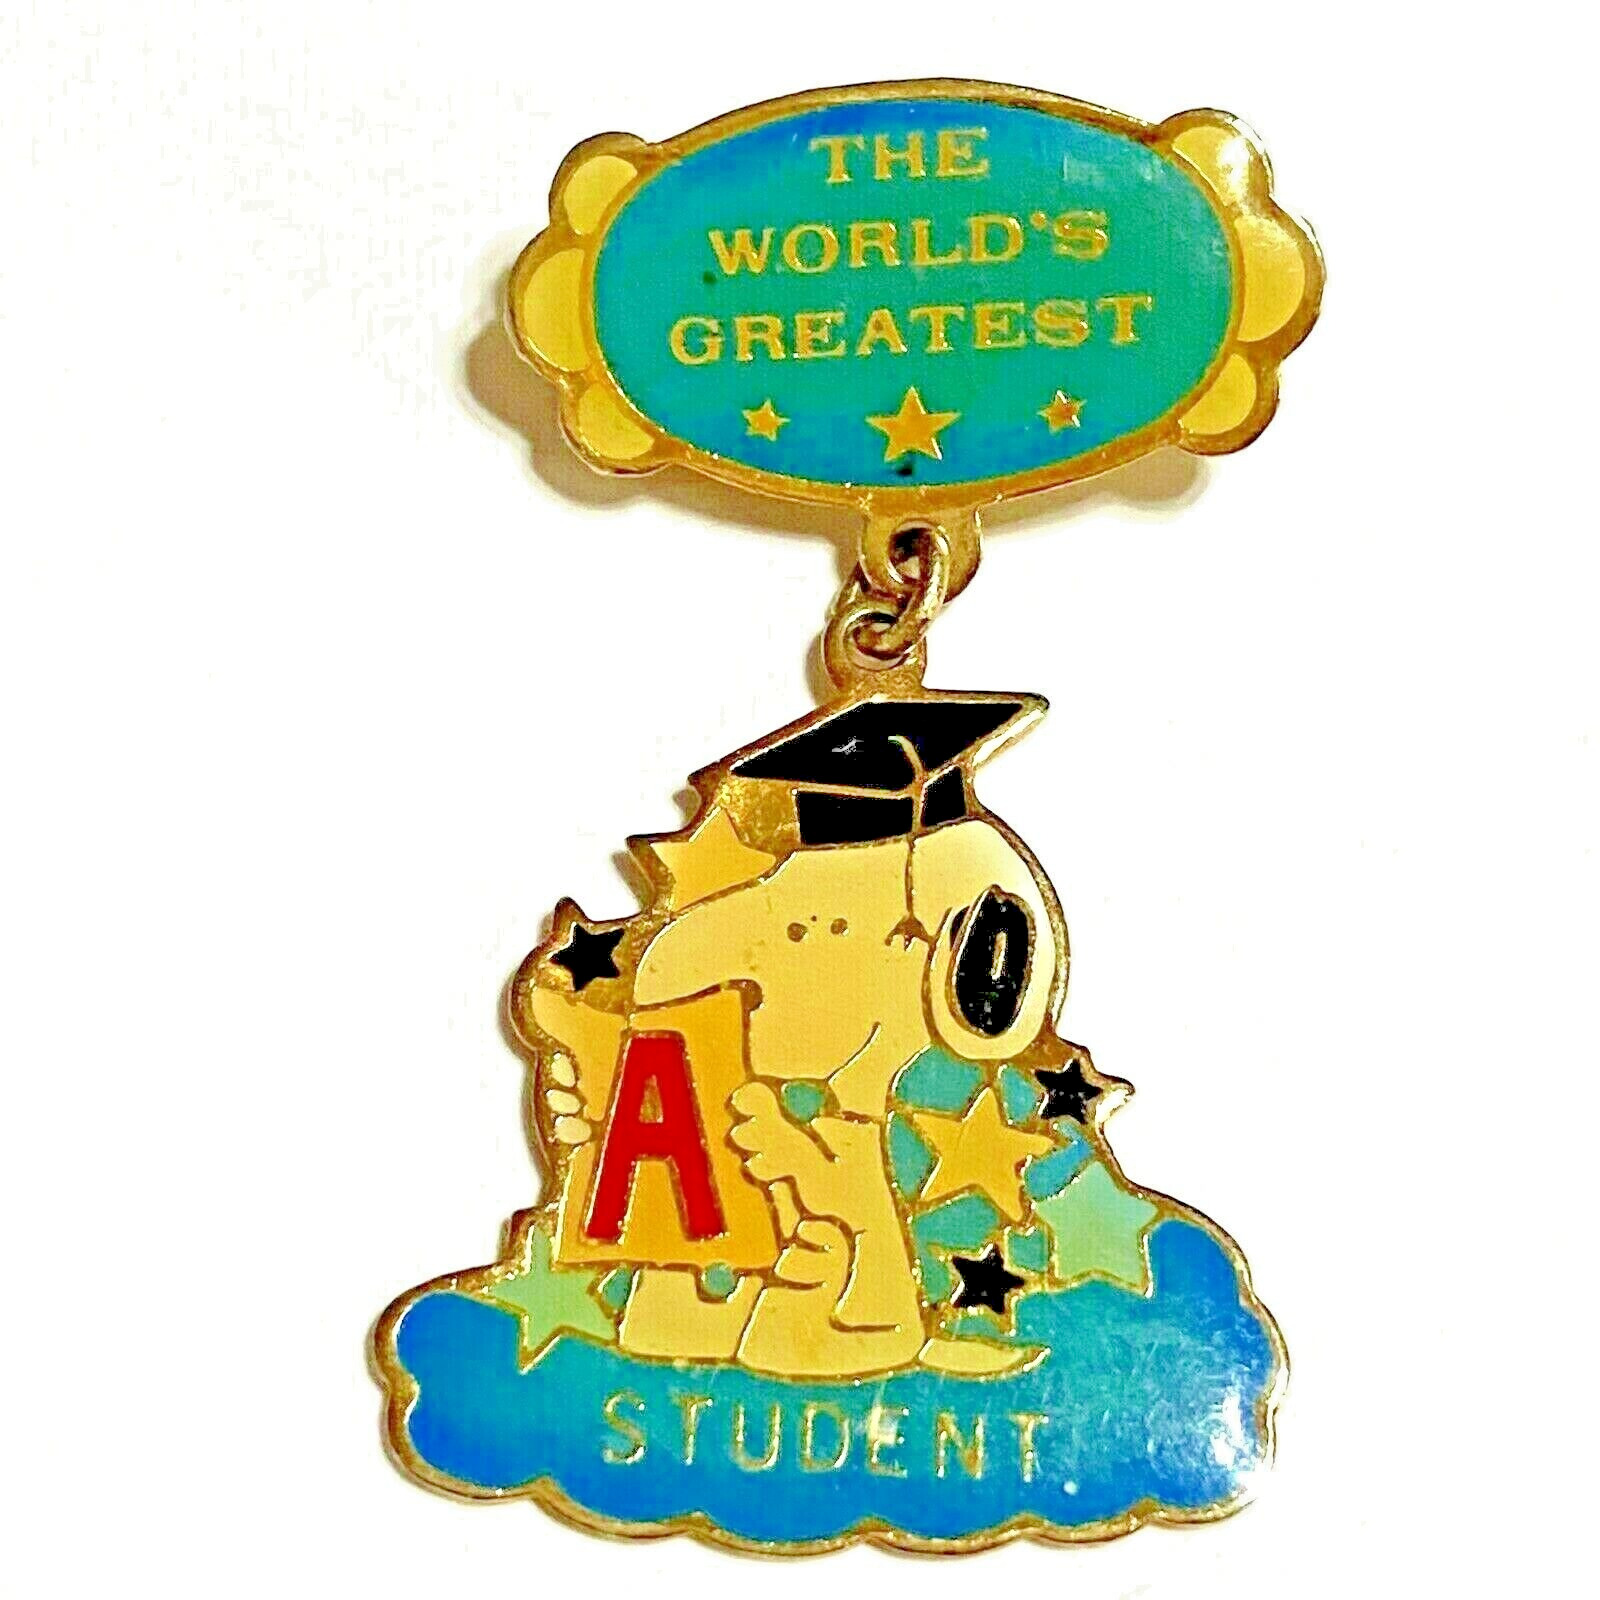 VTG 1958 SNOOPY The Worlds Greatest Student Lapel Pin - AUTHENTIC - RARE